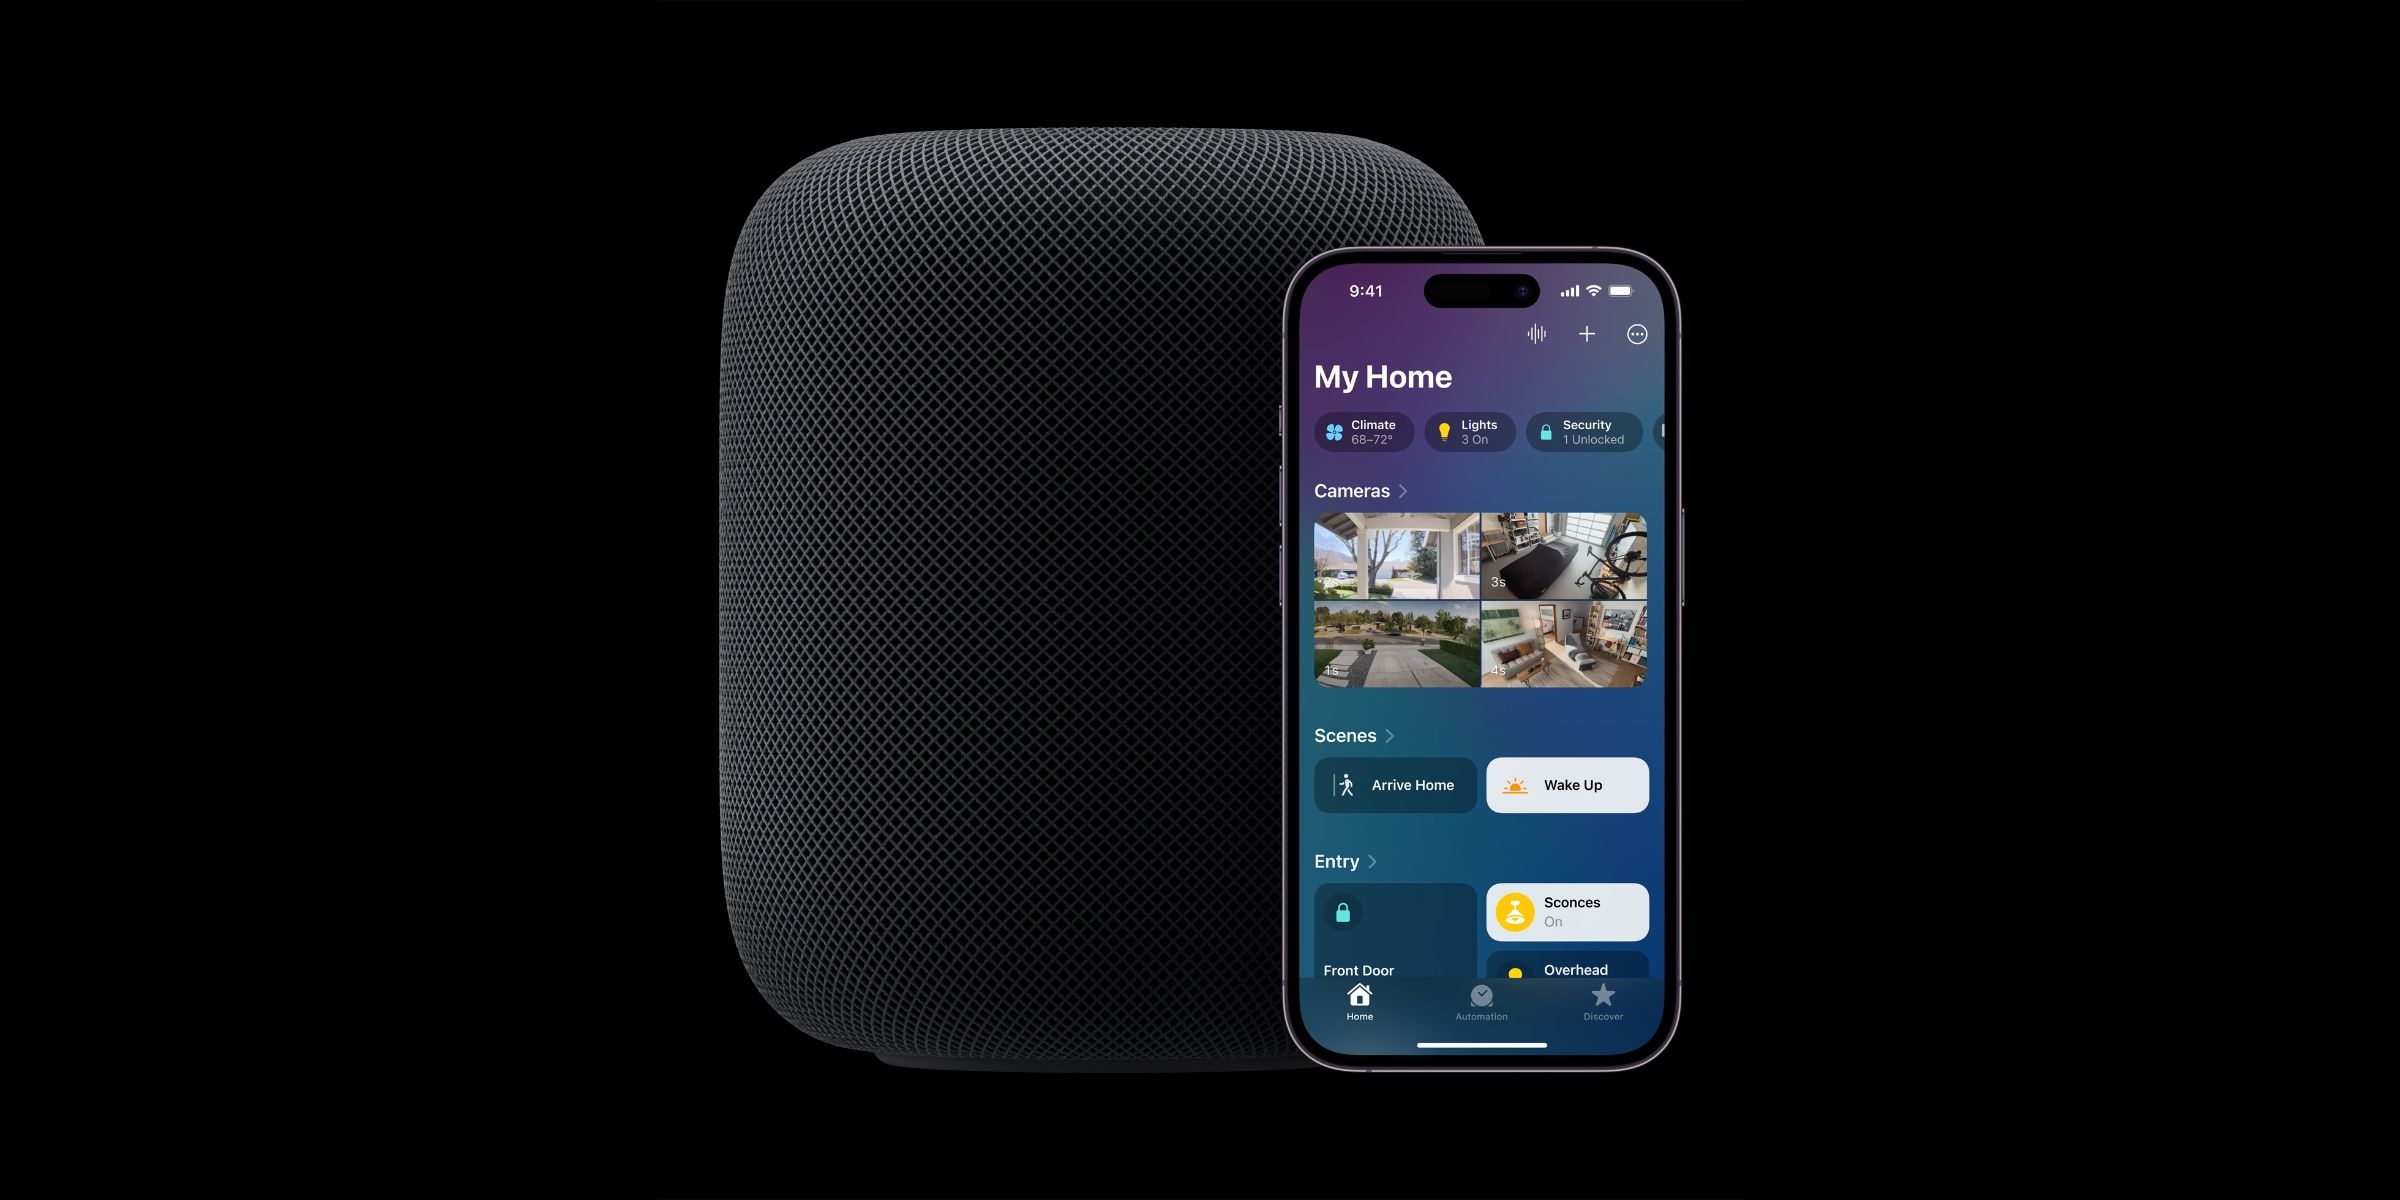 A second-generation HomePod beside an iPhone with the Home App opened.